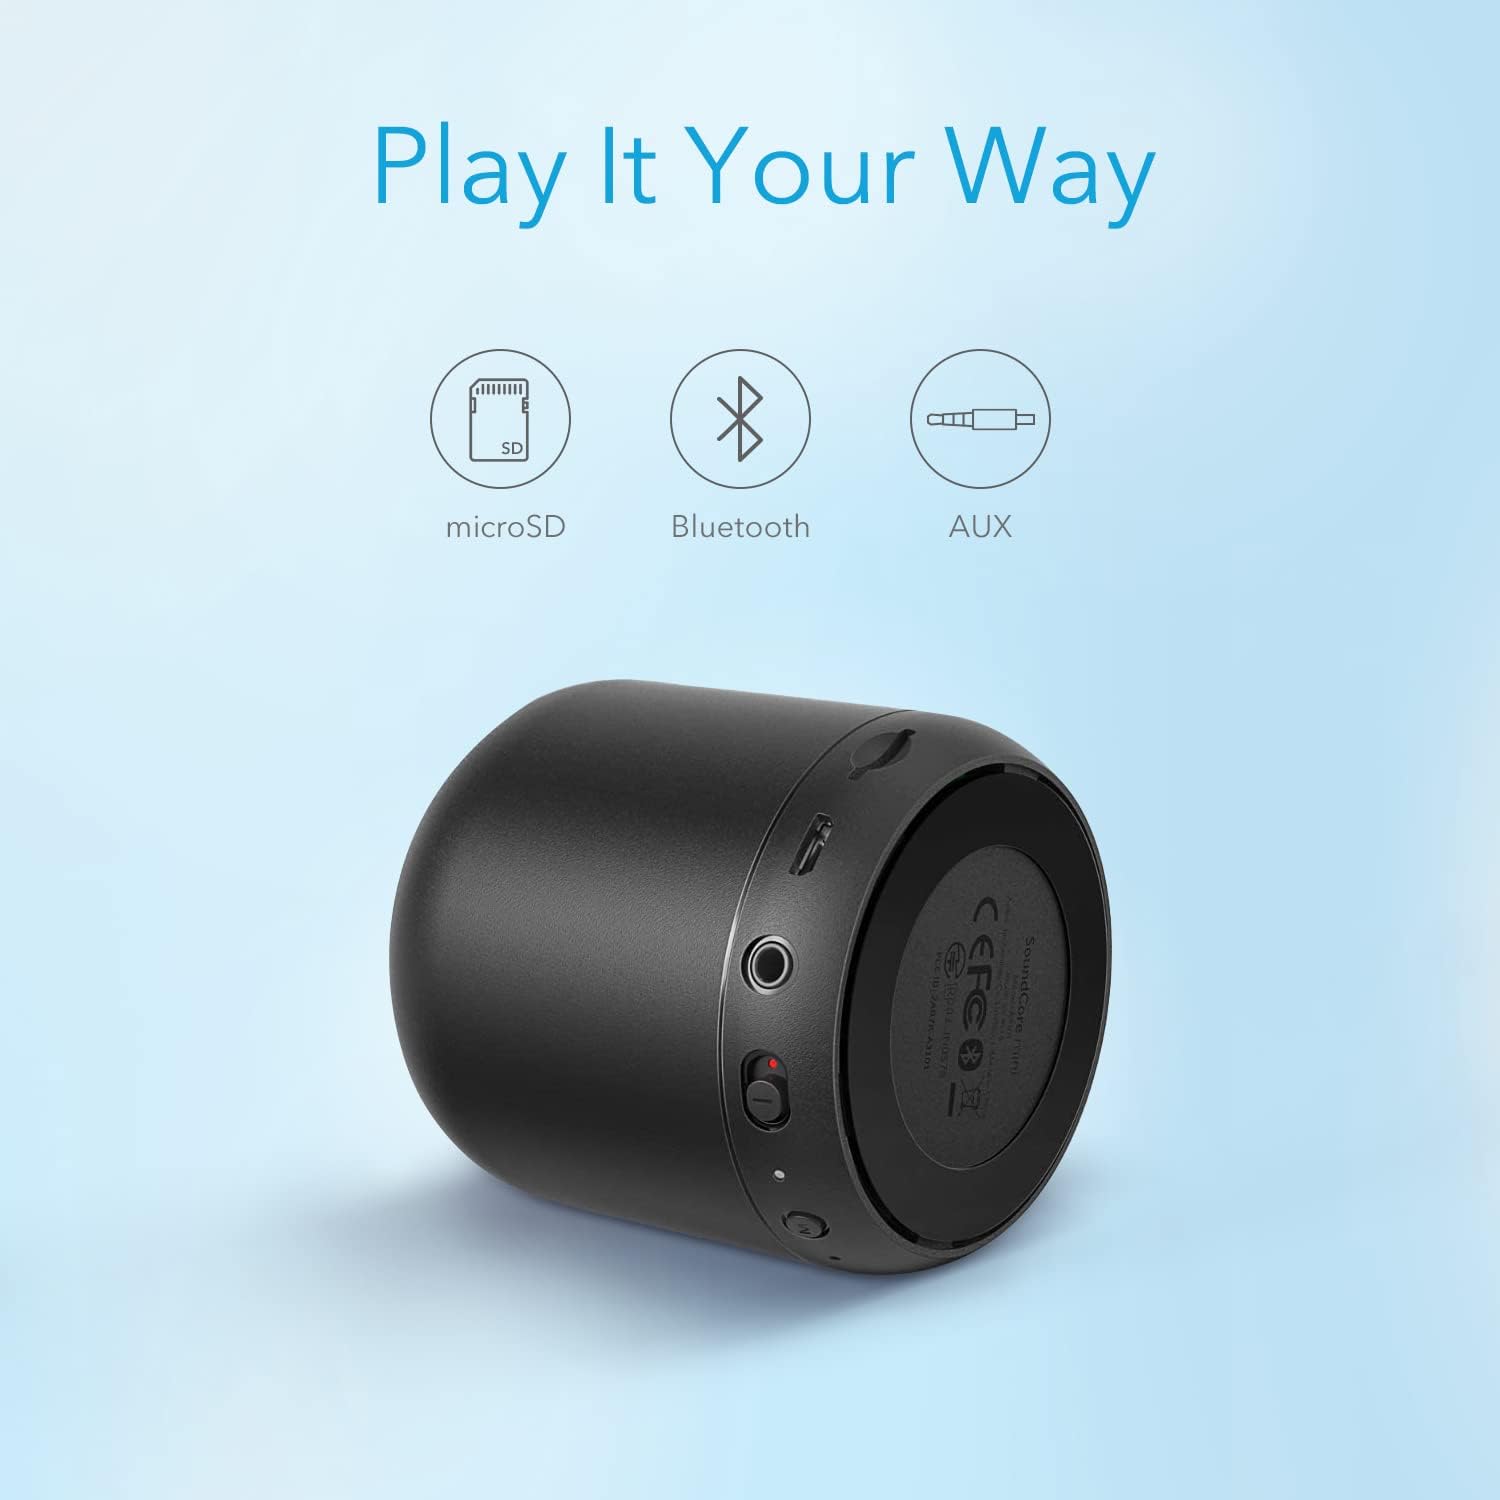 Anker Soundcore Mini, Portable Bluetooth Speaker with 15 Hours Playtime, 66ft Bluetooth Range, Enhanced Bass, and Noise Cancelling Microphone